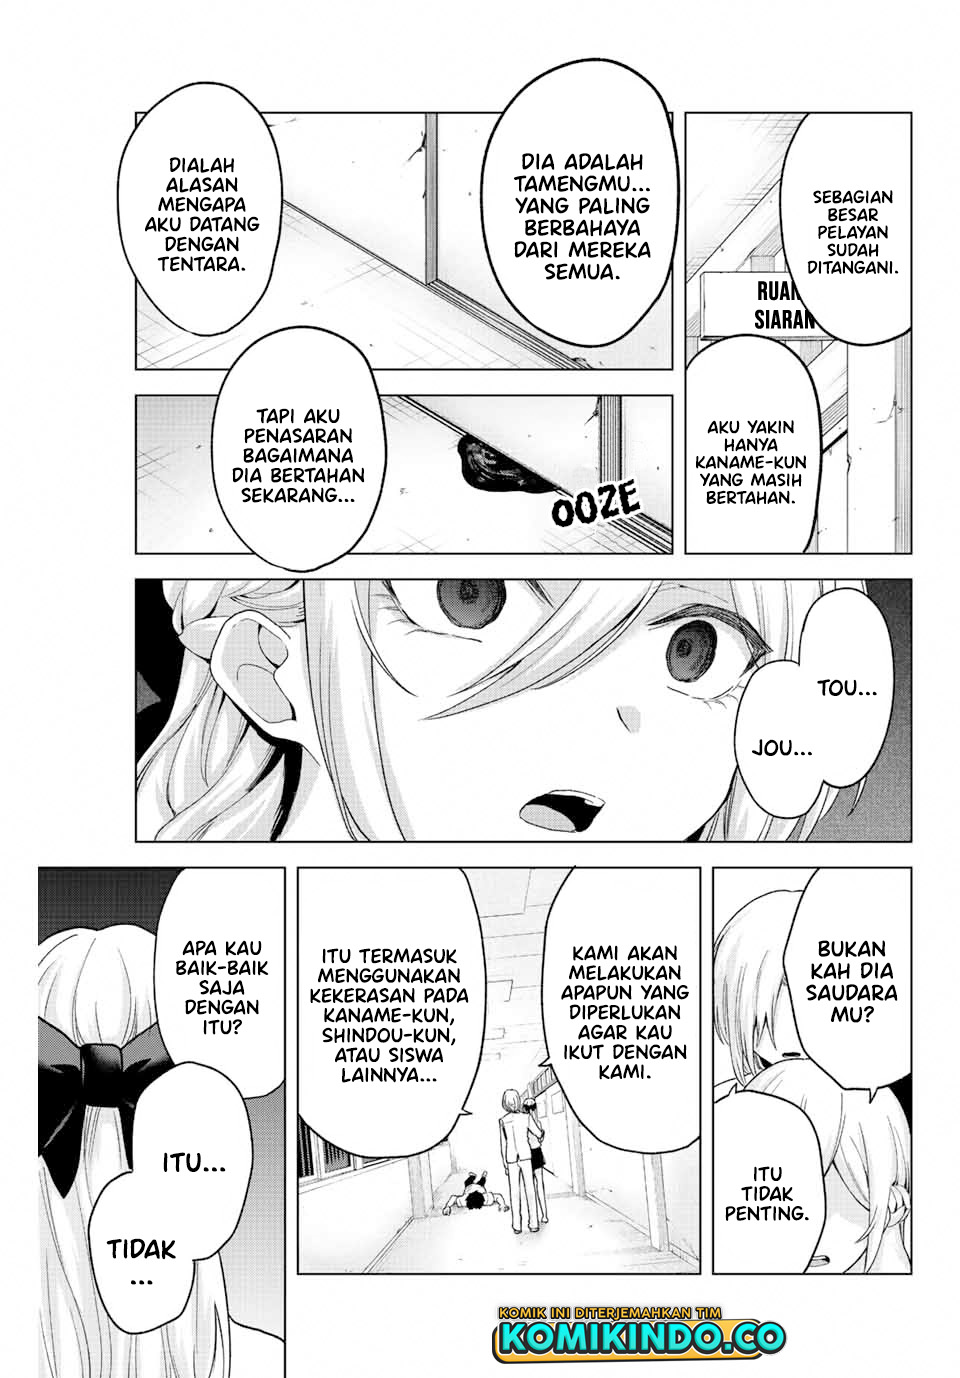 The Death Game Is All That Saotome-san Has Left Chapter 32